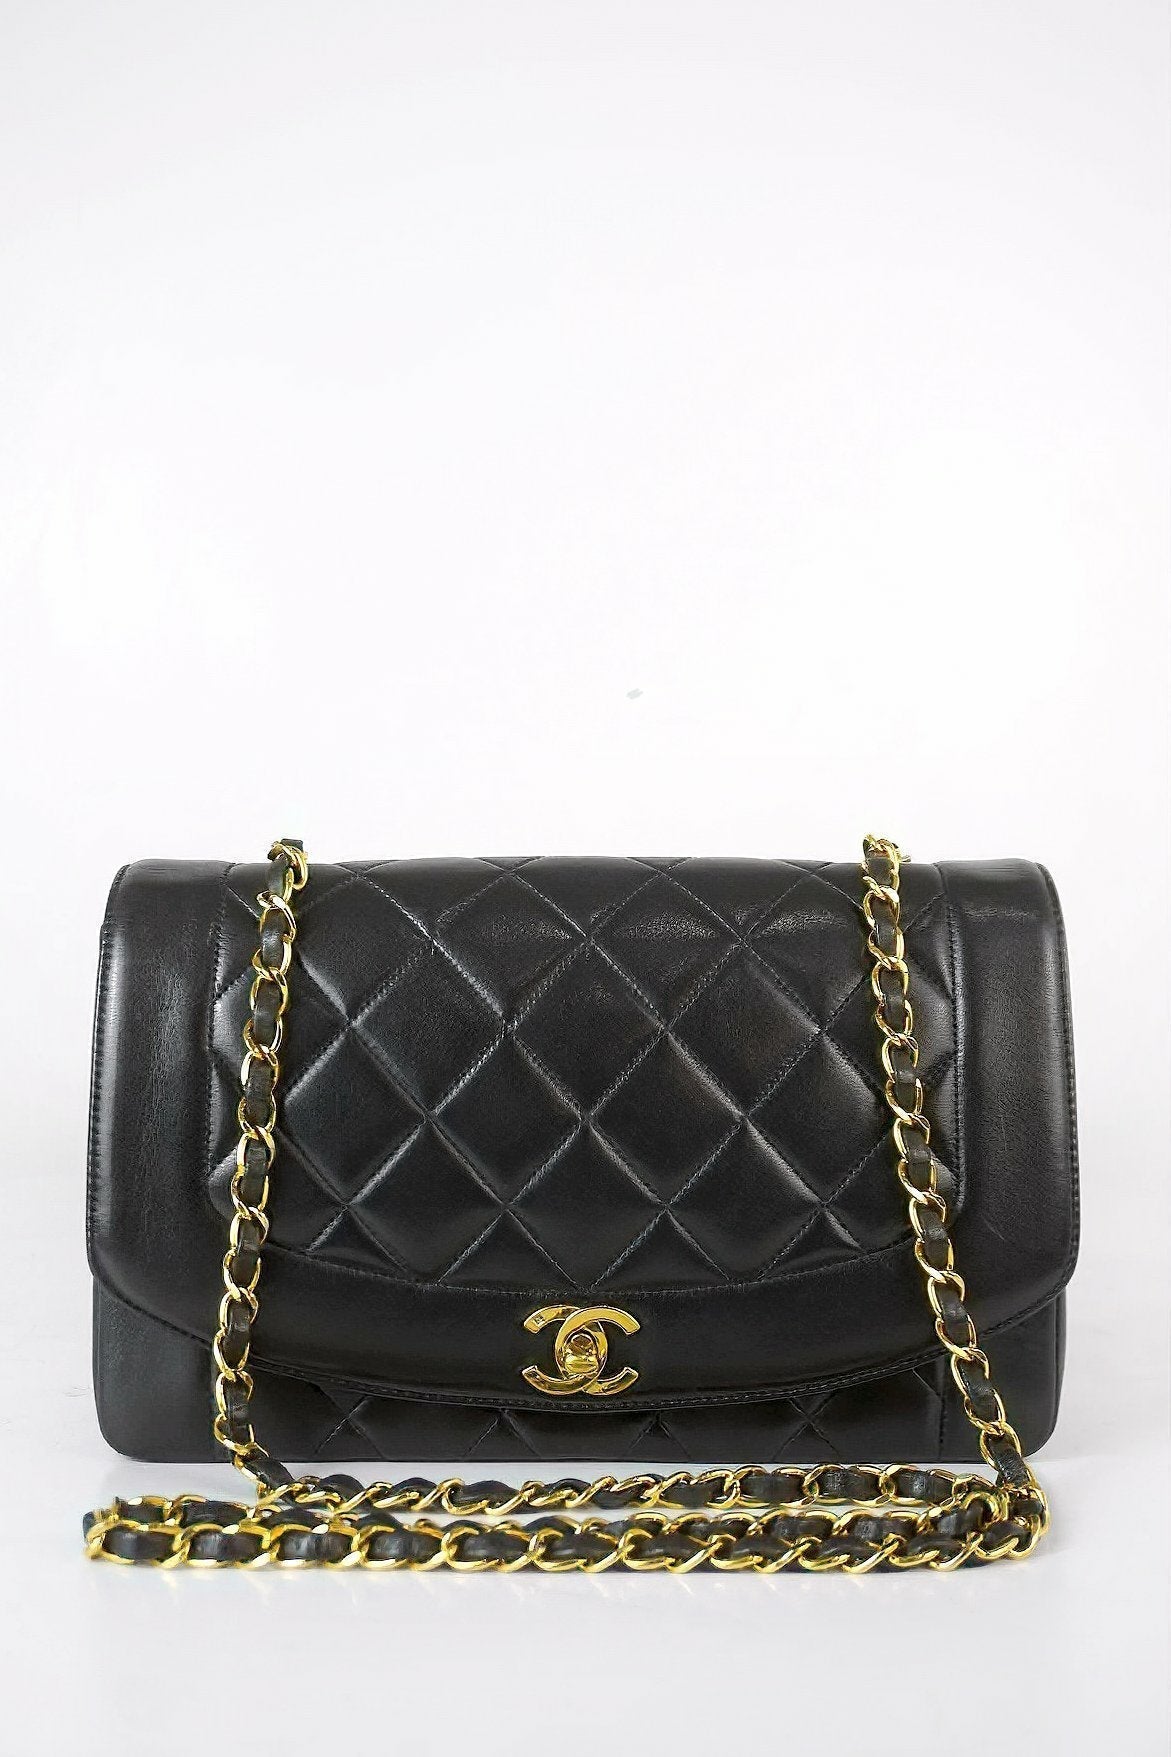 Chanel Vintage Diana Napa Quilted Leather Flap Bag 1991-1994 - Foxy Couture Carmel